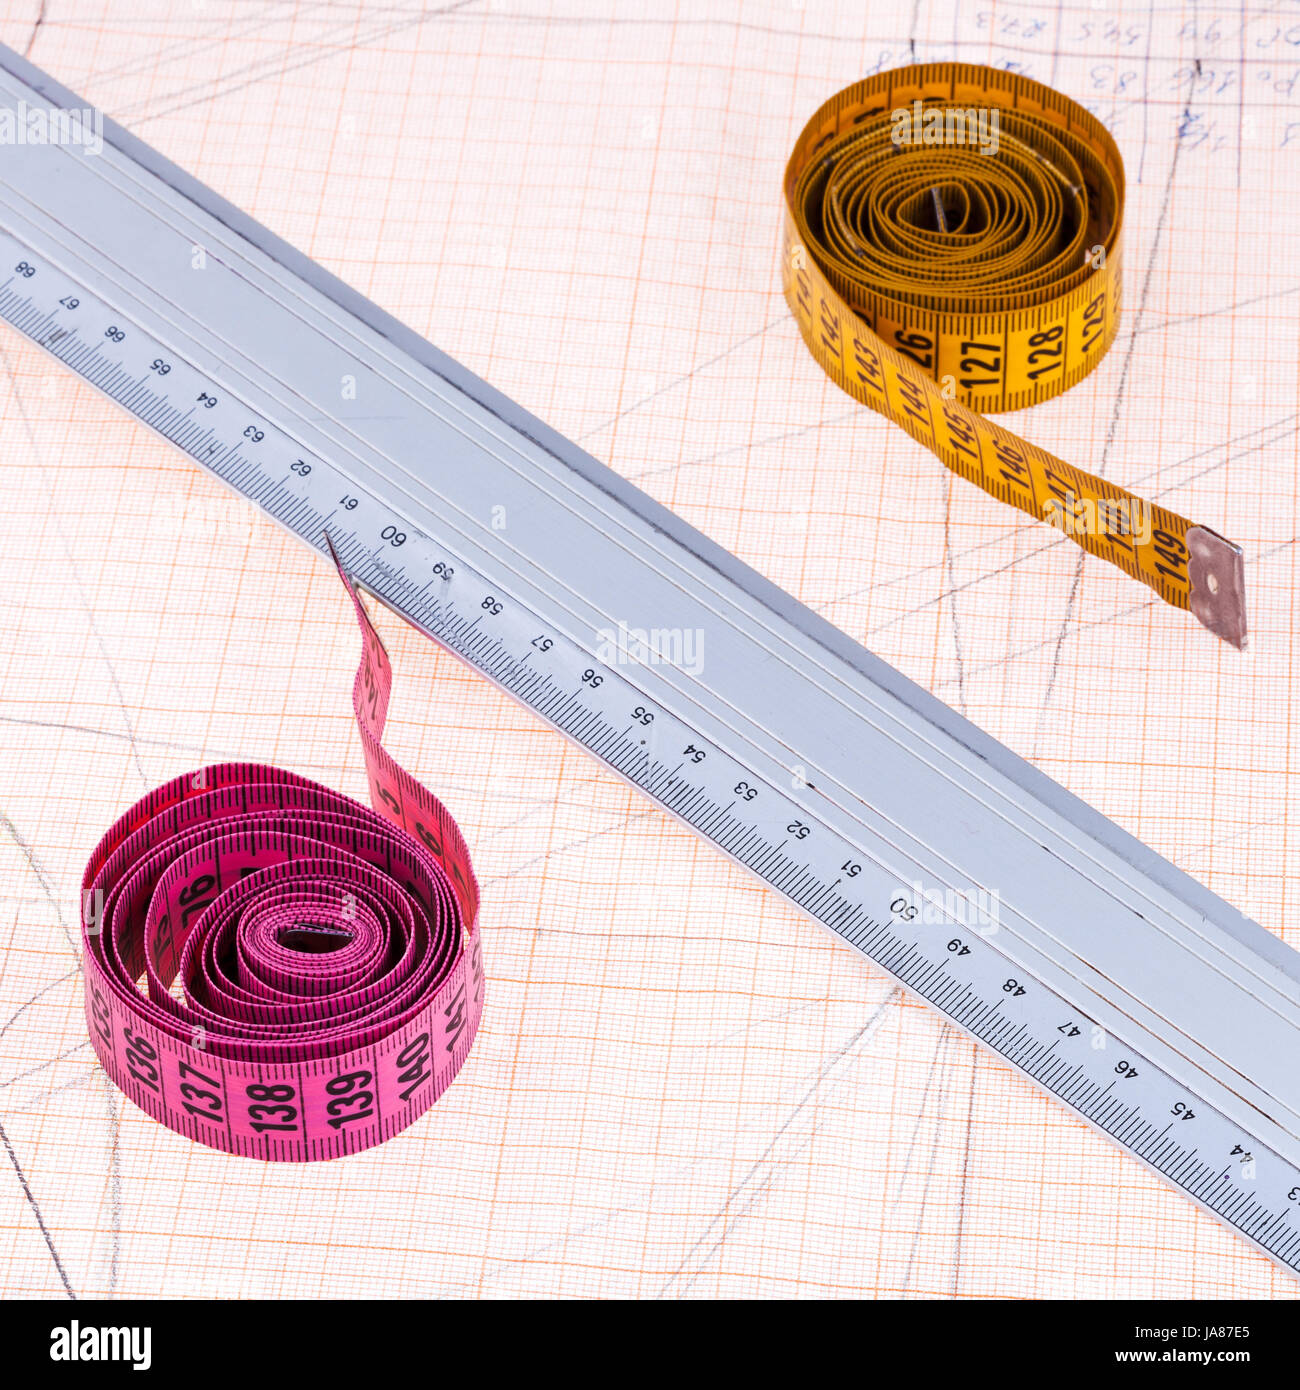 Measuring tape stock photo. Image of pink, meters, sewing - 9663064